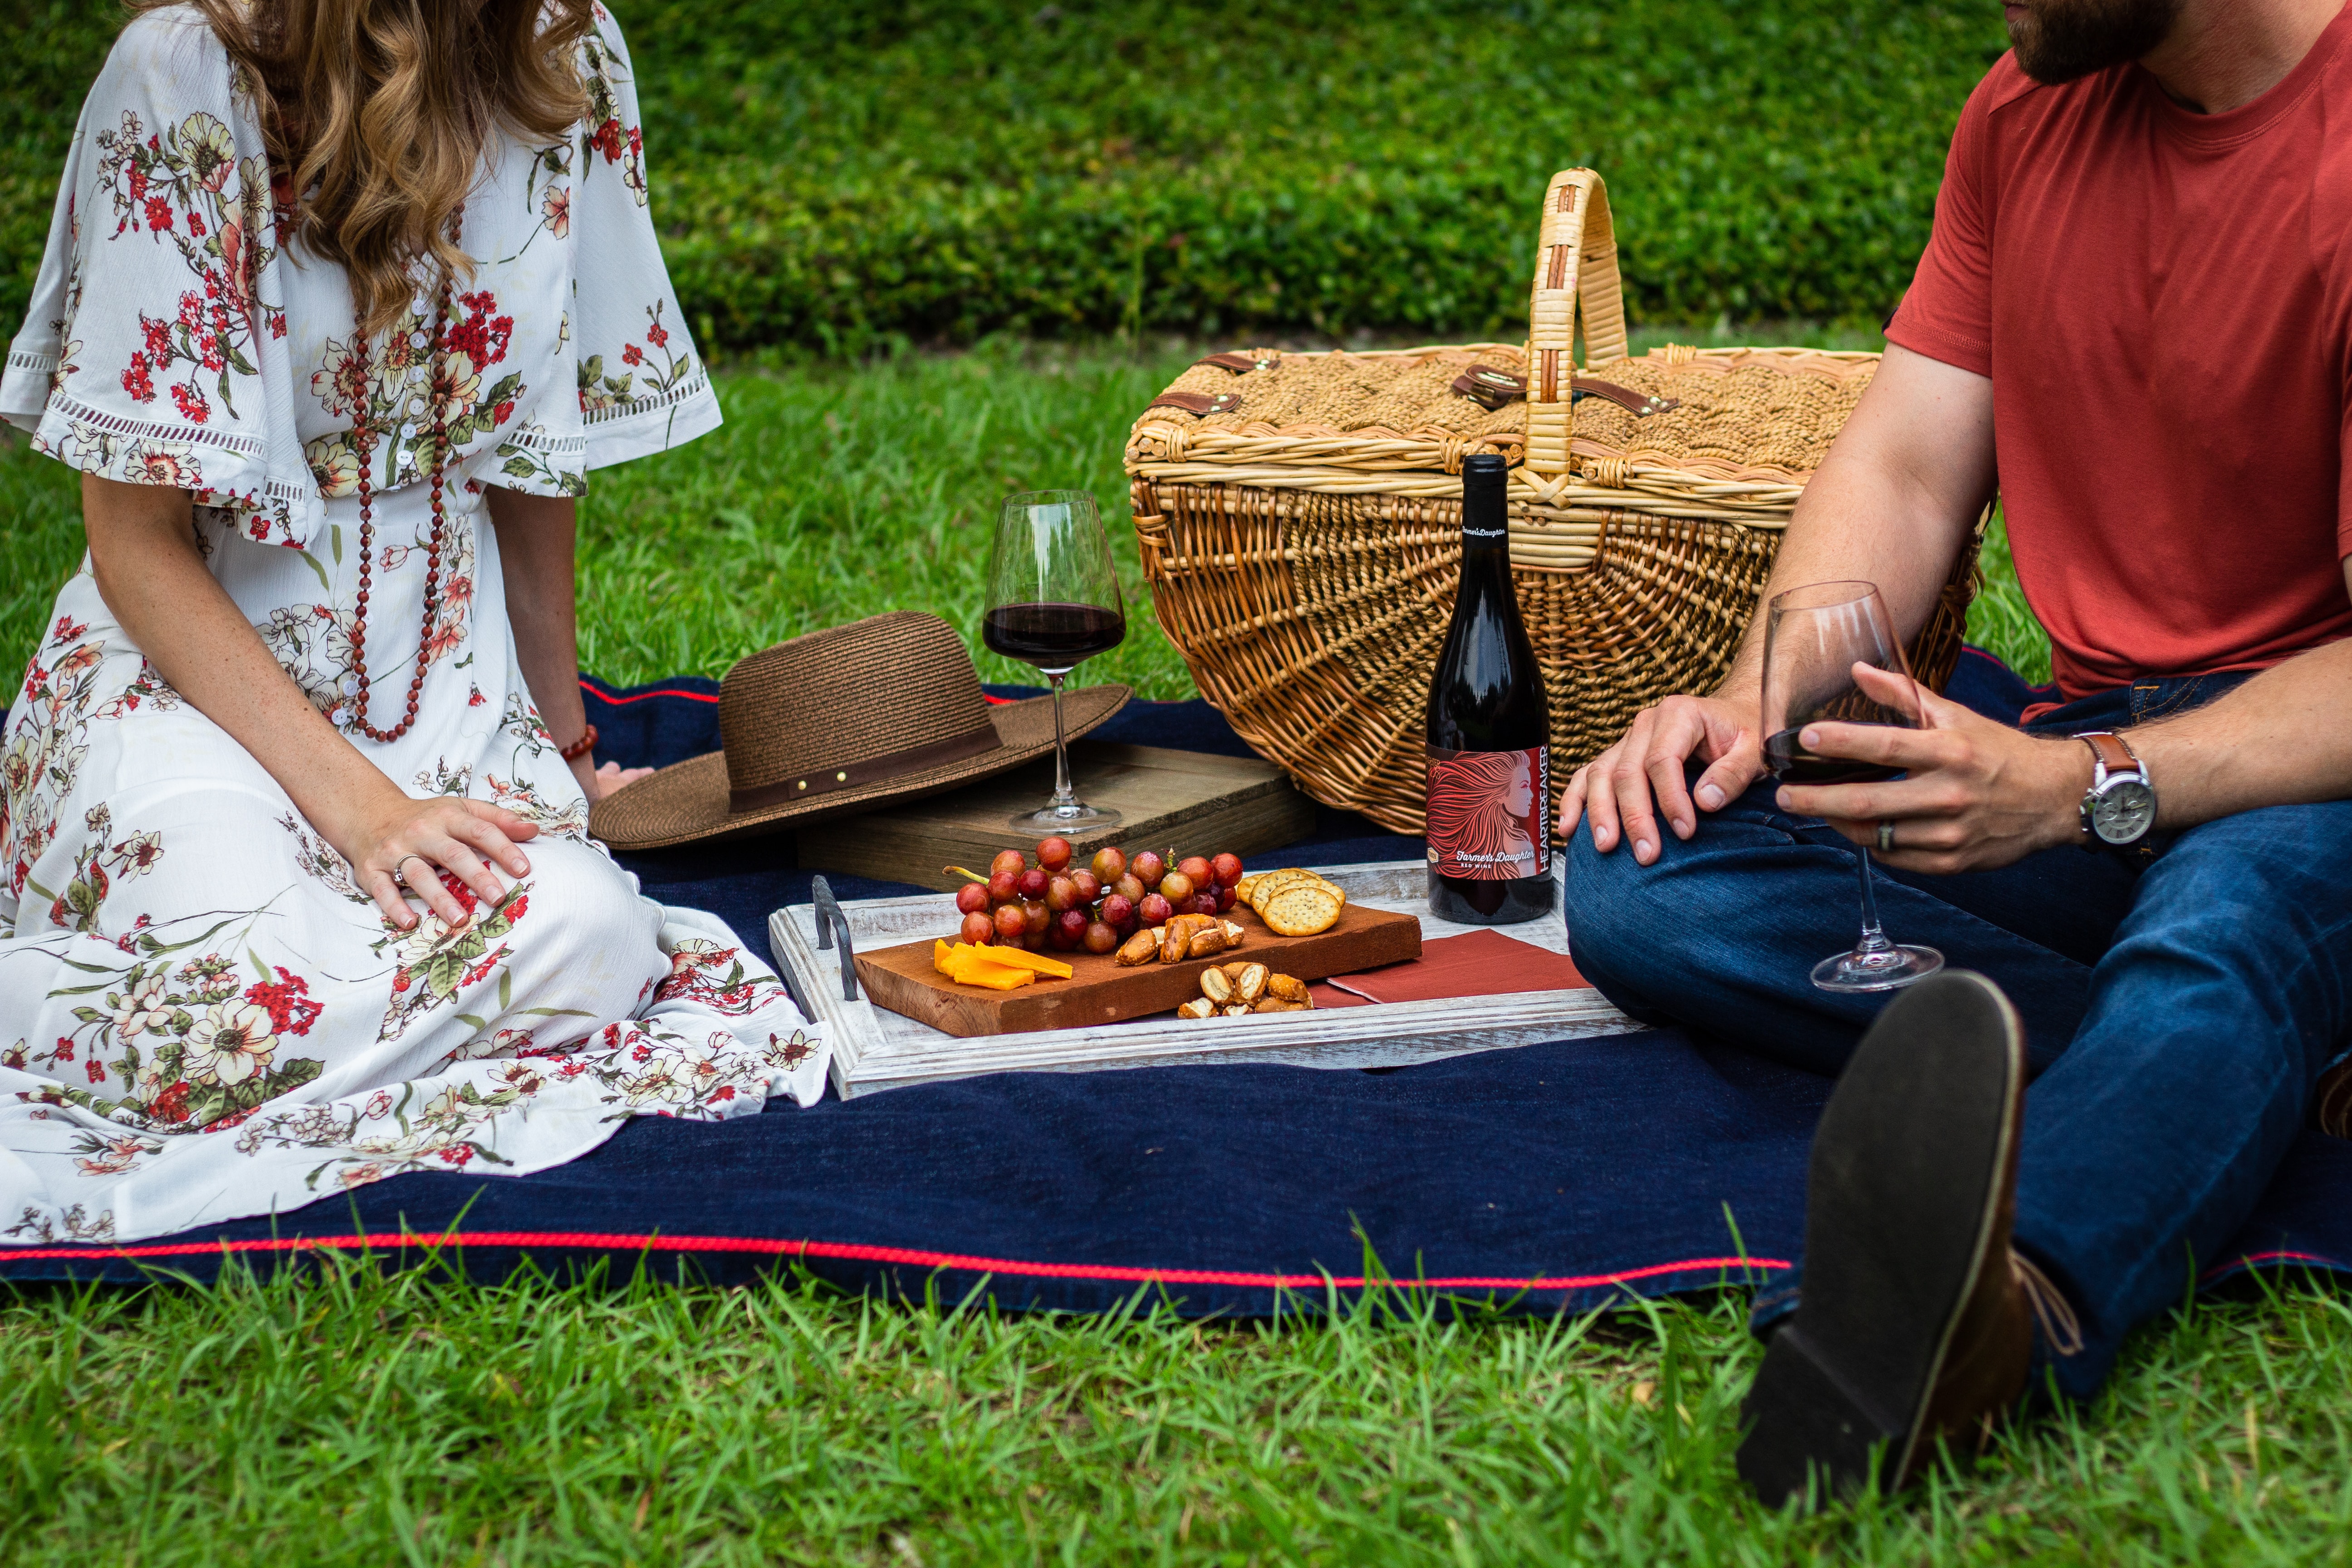 5 Ideas for Your Summer Picnic